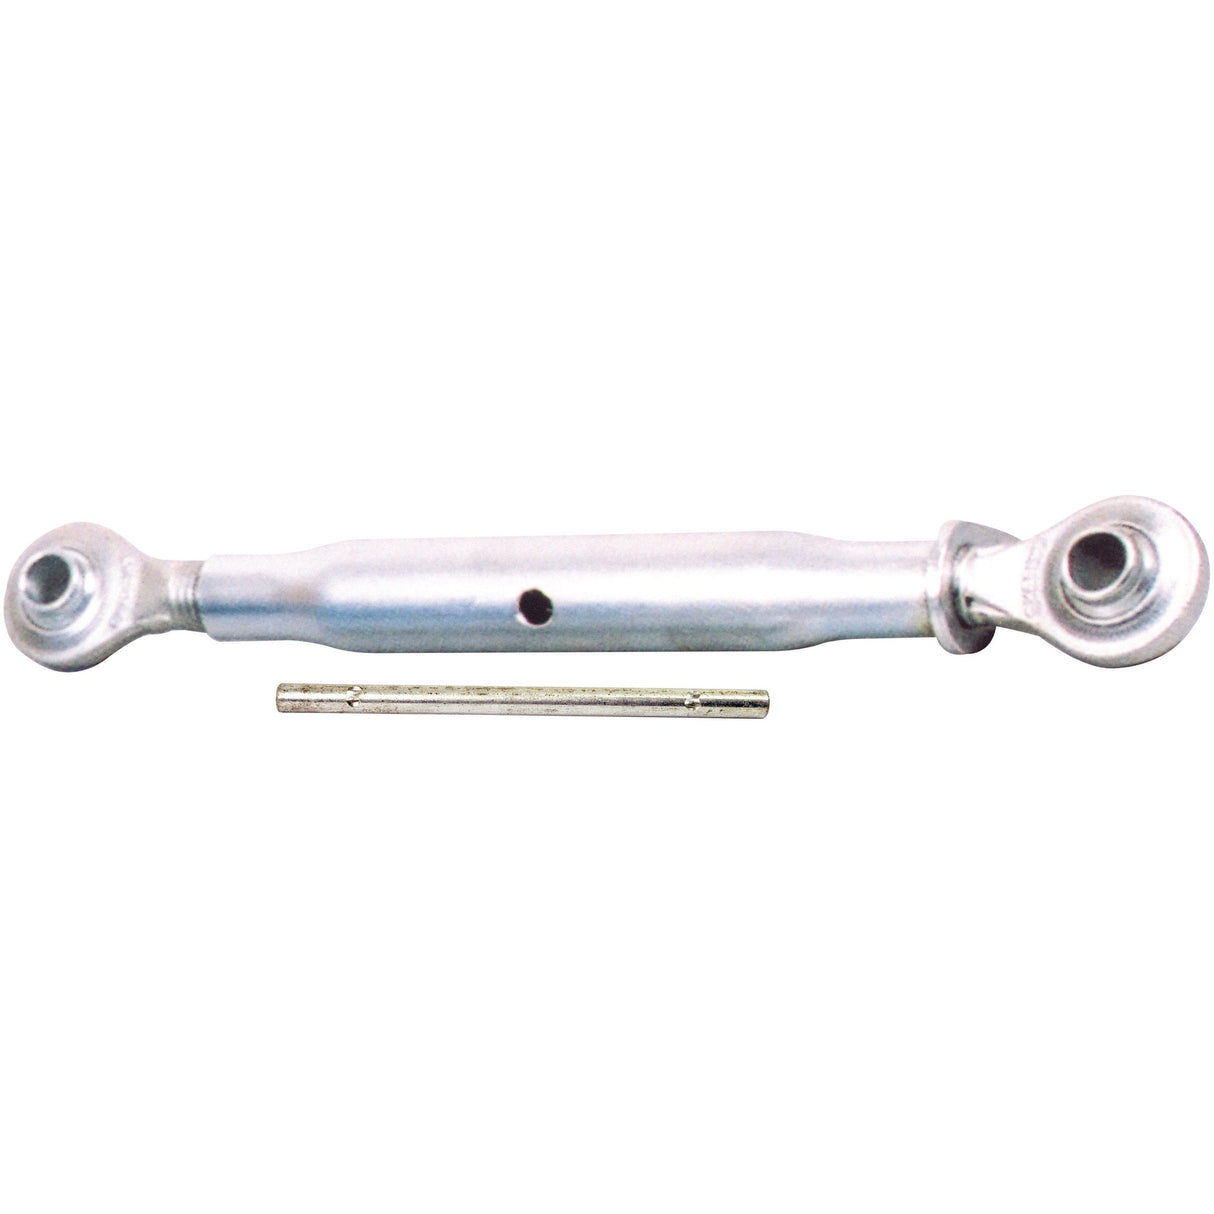 Top Link (Cat.1/2) Ball and Ball,  1 1/8'', Min. Length: 495mm.
 - S.394 - Farming Parts